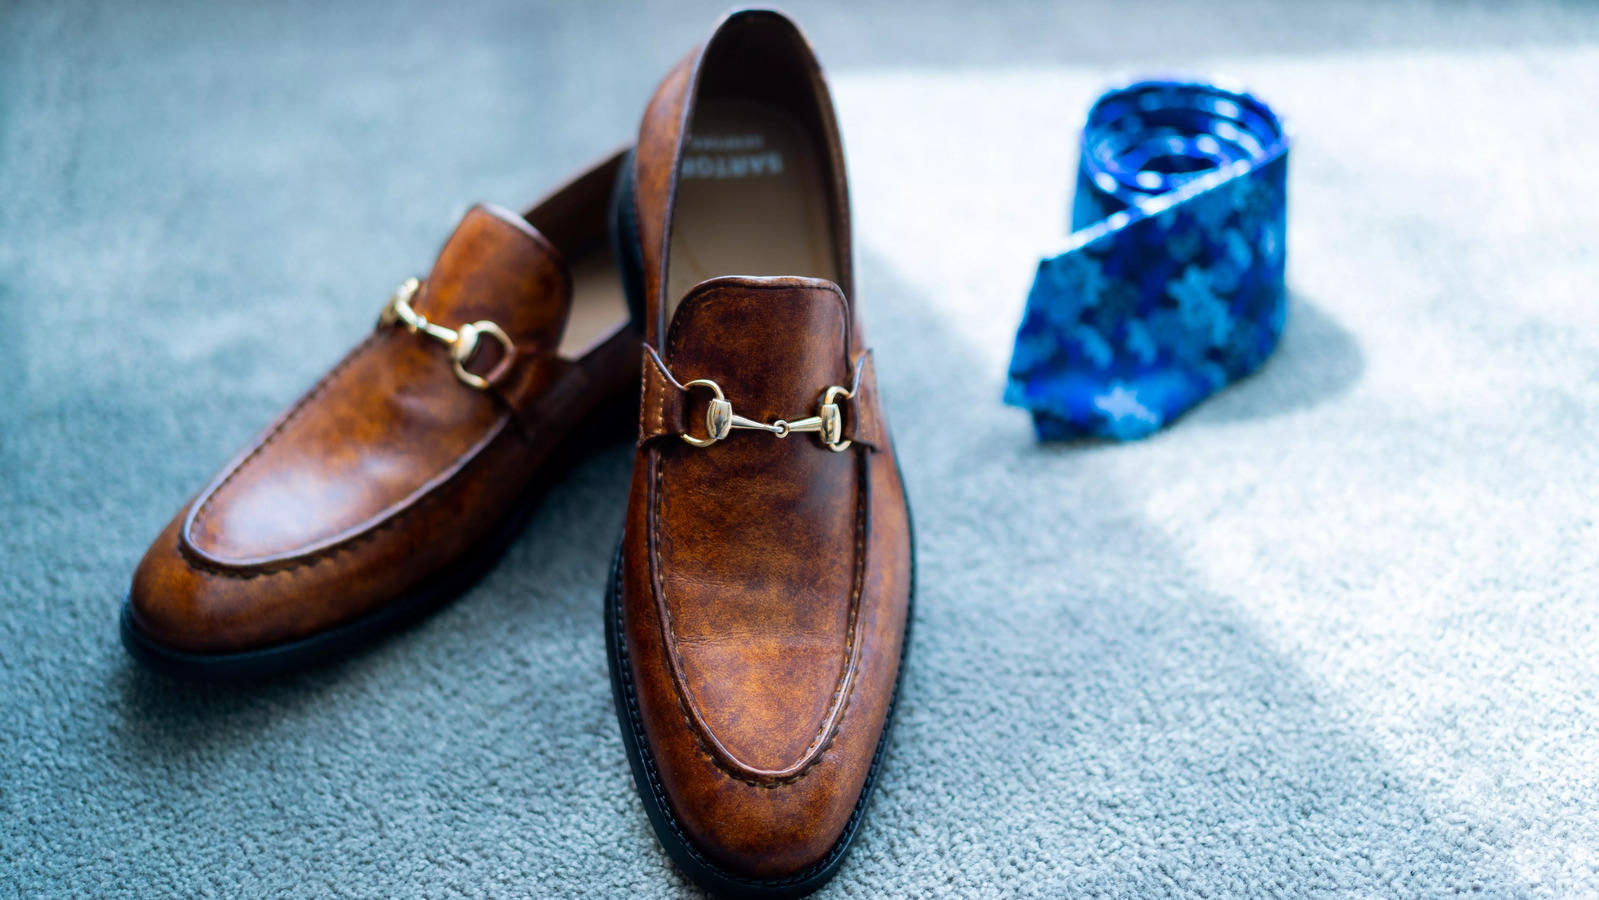 15 Best Men's Loafers for Every Type of Trip | Condé Nast Traveler